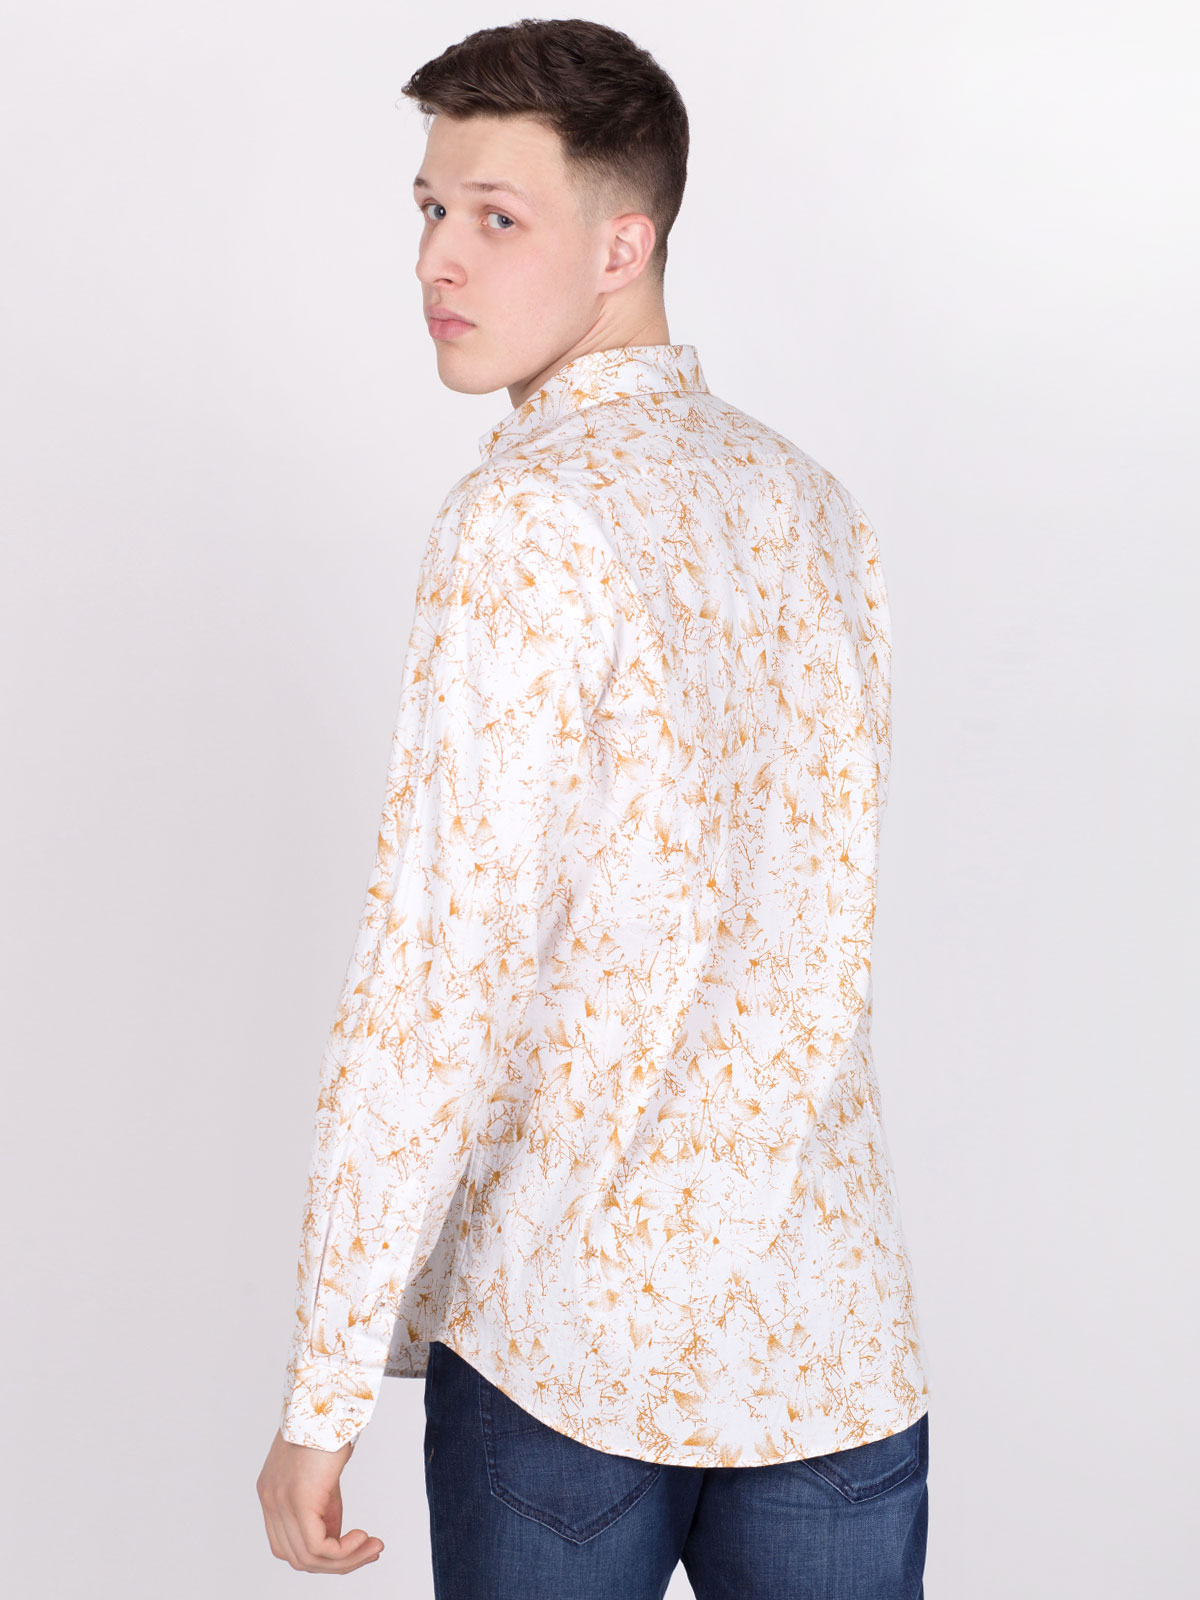 Mens white shirt with floral print - 21468 € 12.37 img2